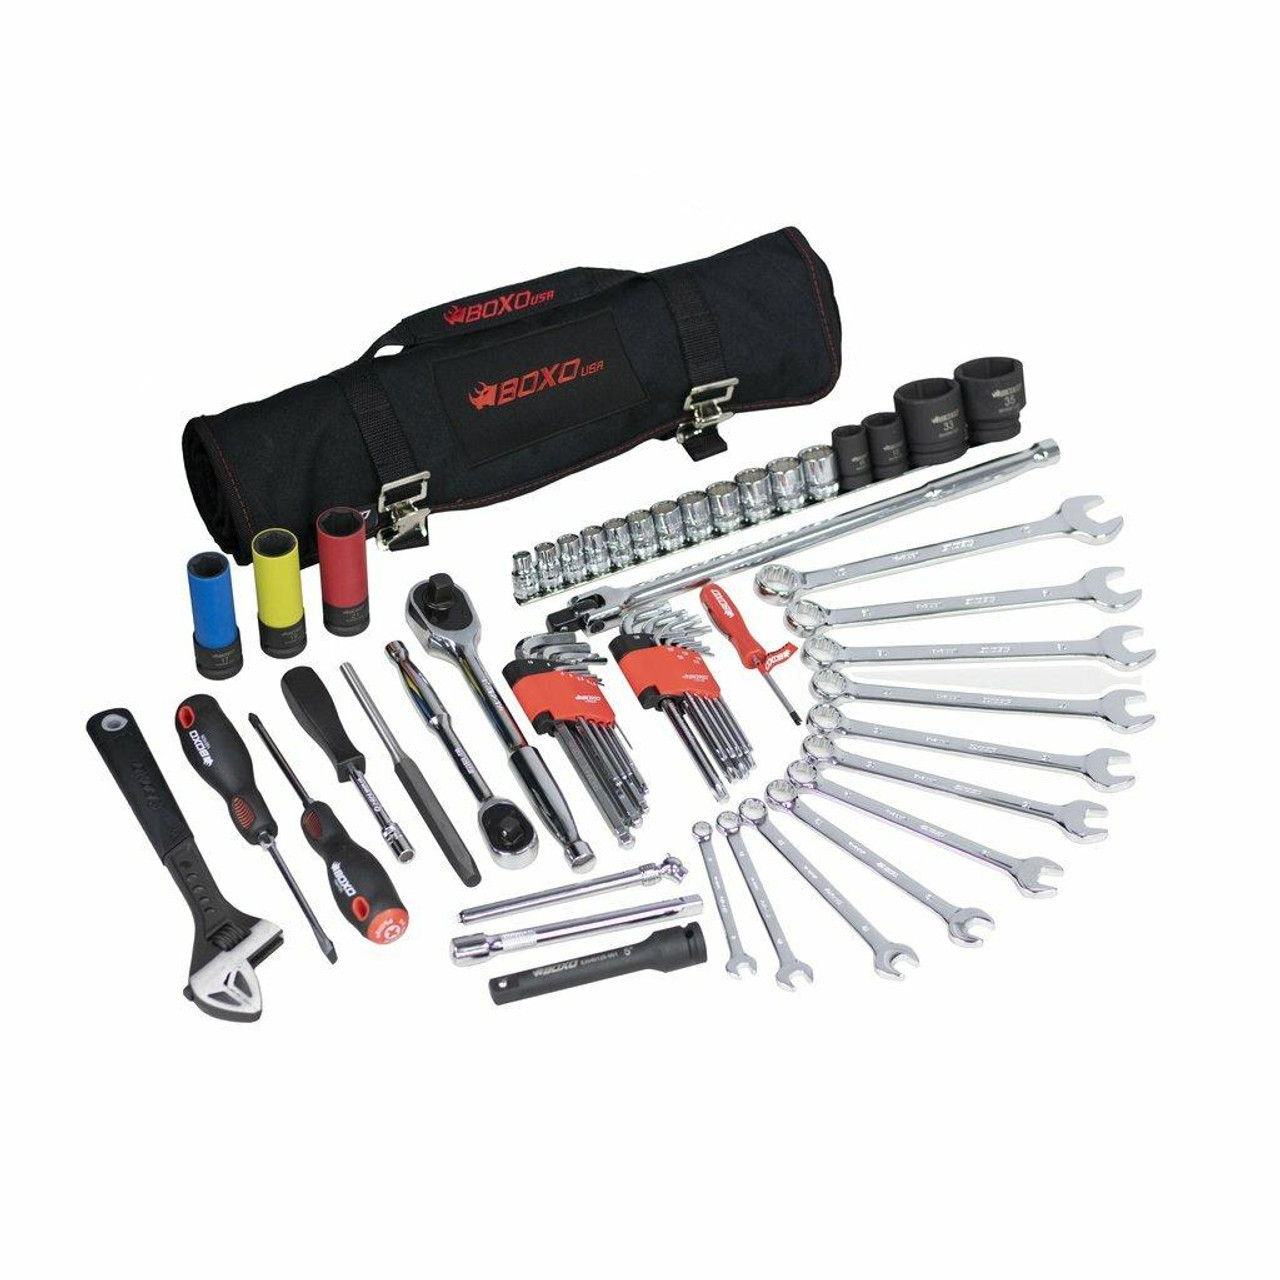 Buy BOXO USA 82-Piece Boat Tool Roll at UTV Source. Best Prices